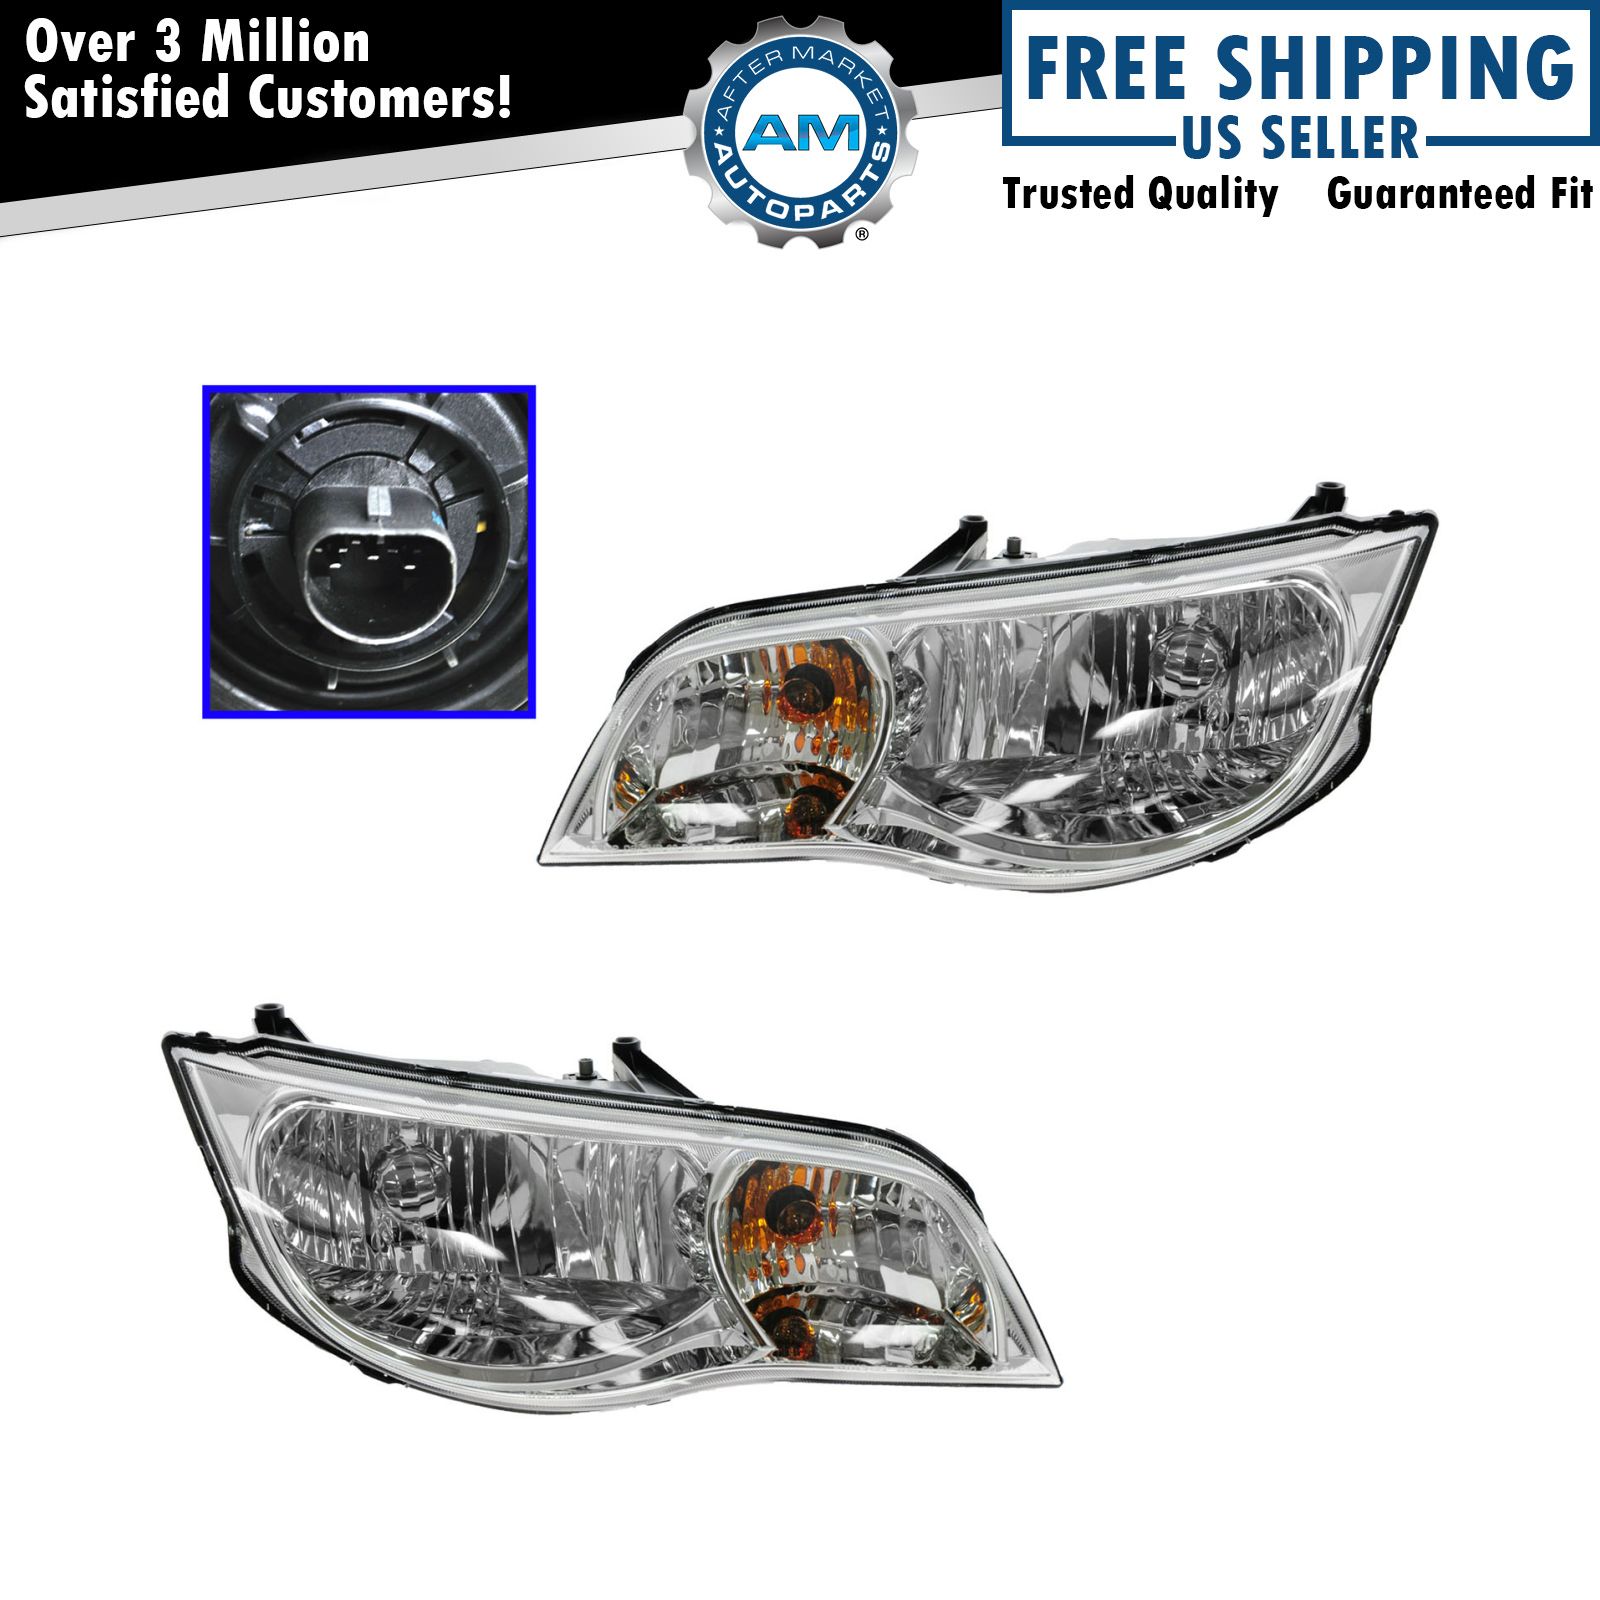 Headlights Headlamps Left & Right Pair Set NEW for 03-07 Saturn Ion Coupe